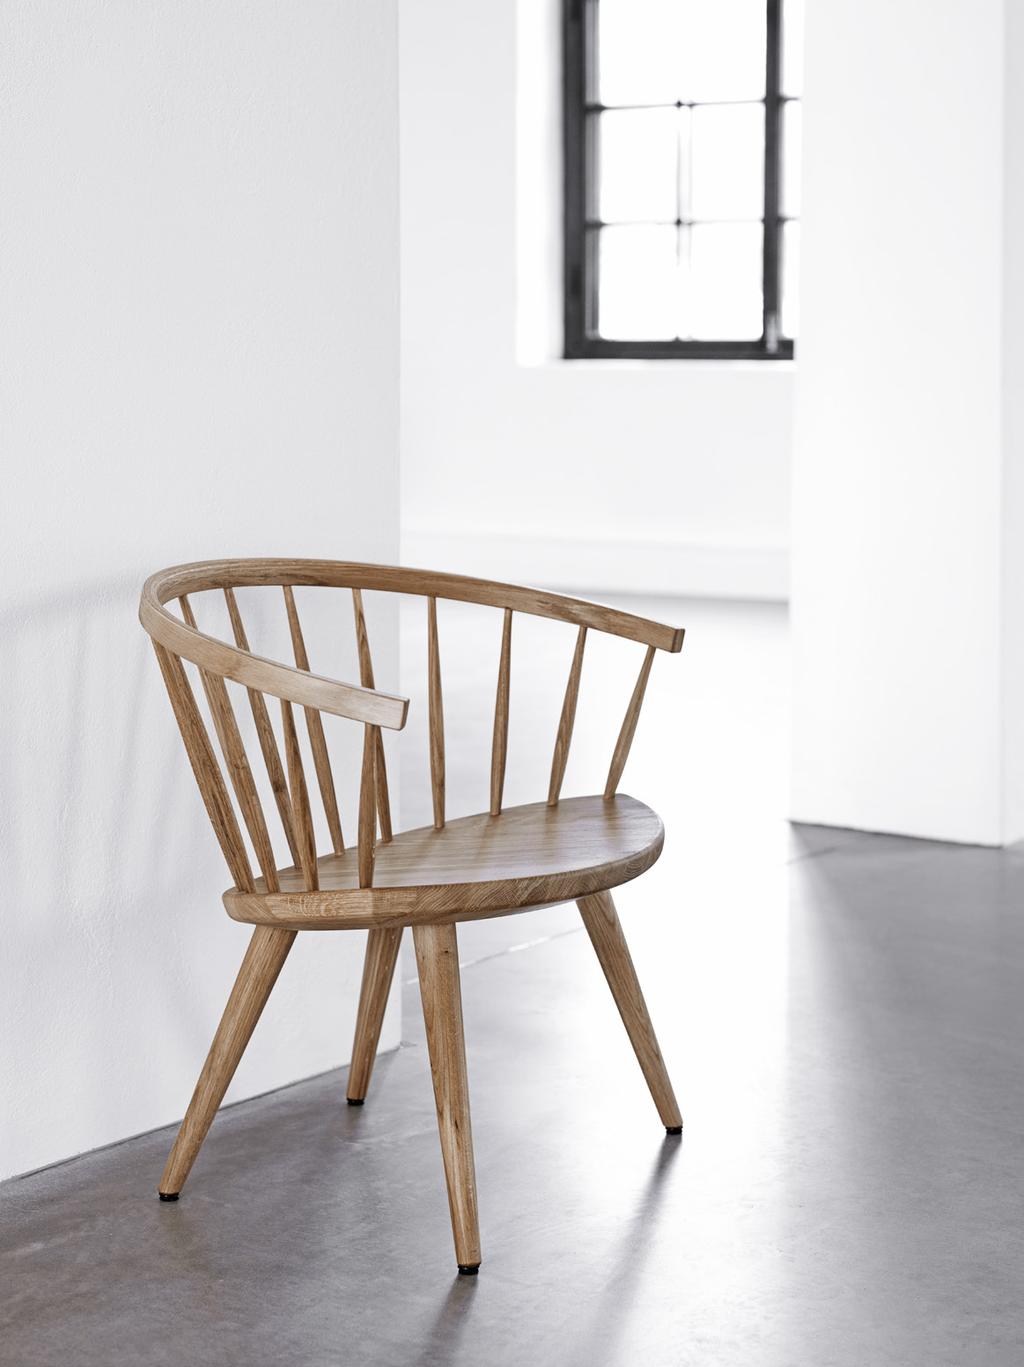 Arka turns 60 in 2015 and we are celebrating this by introducing a new oak version, initially as an exclusive, numbered edition with a production run of only 155 chairs.